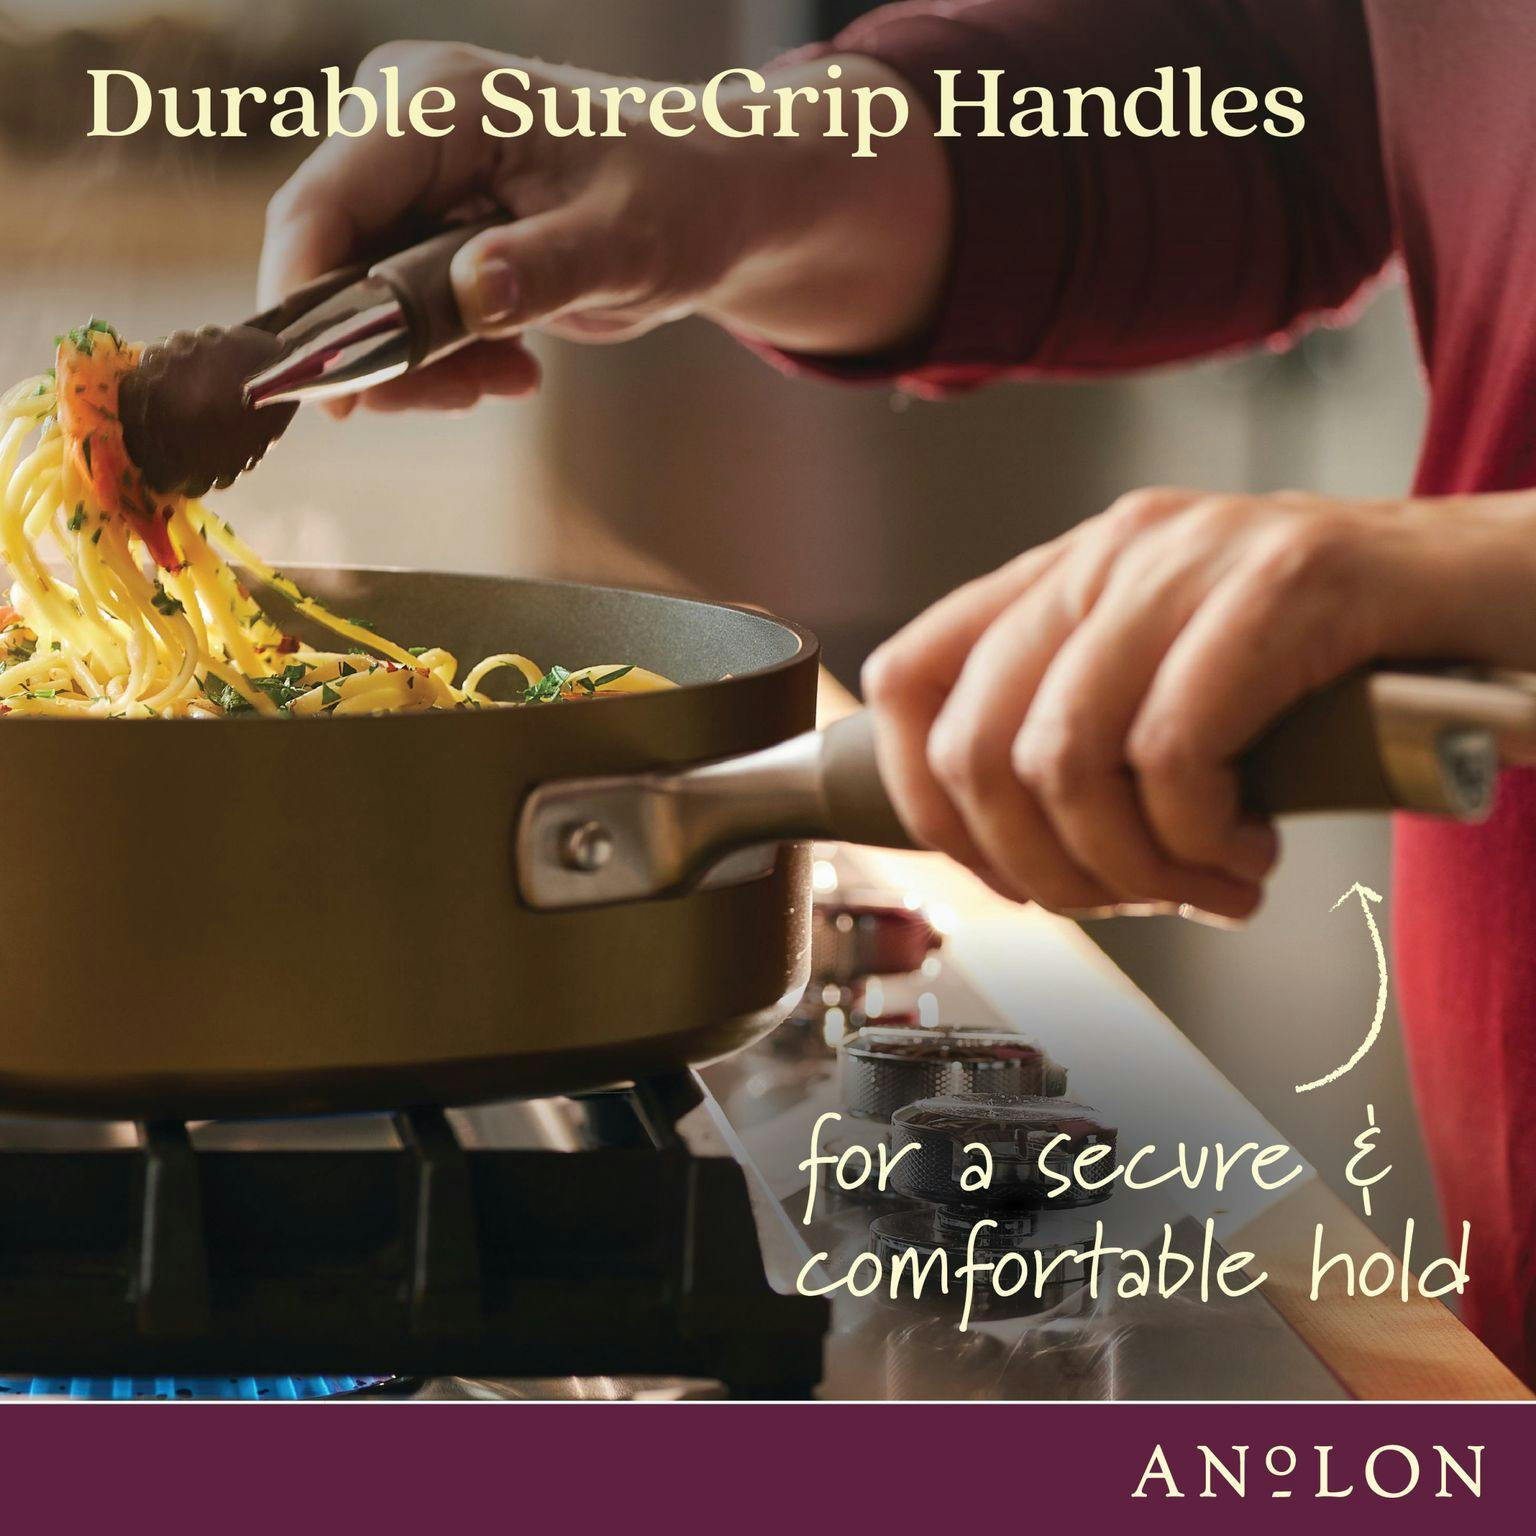 Anolon Advanced Home Hard-Anodized Nonstick Wide Stockpot with Lid, 7.5-Quart, Bronze